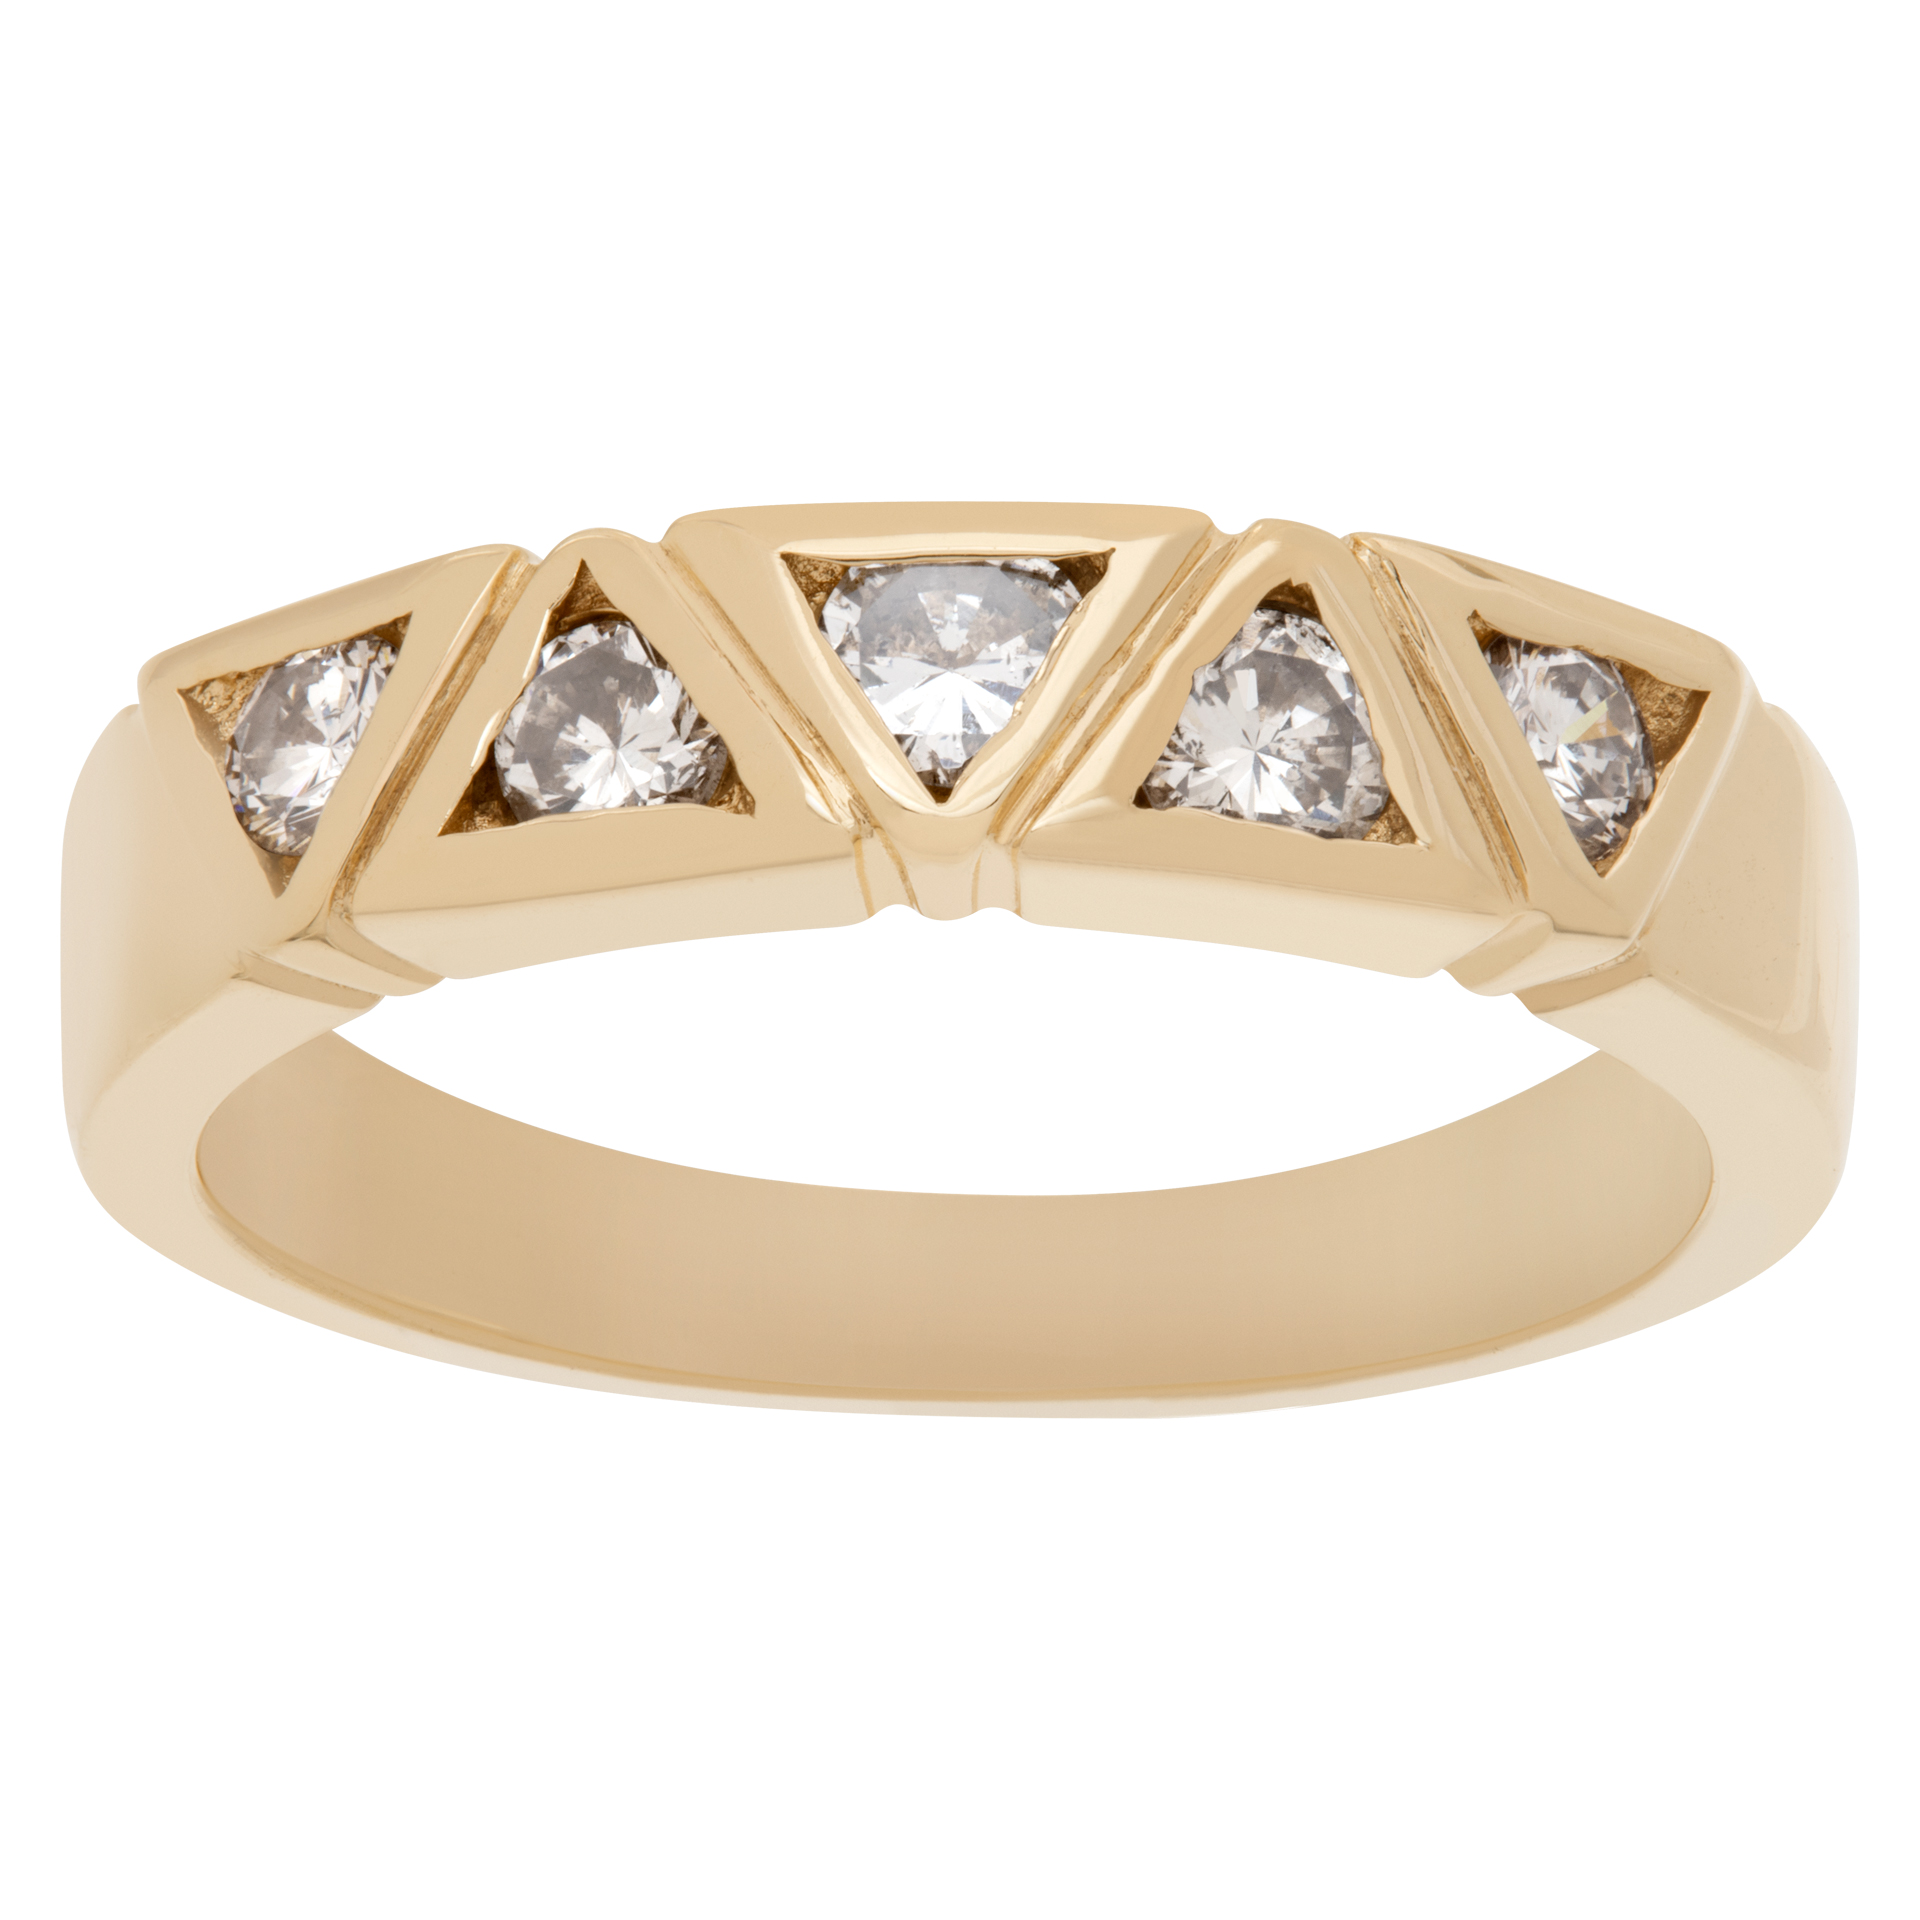 Ring Of Diamond Triangles. 0.50 Carats Set In 14k yellow Gold. Size 7.5 image 1